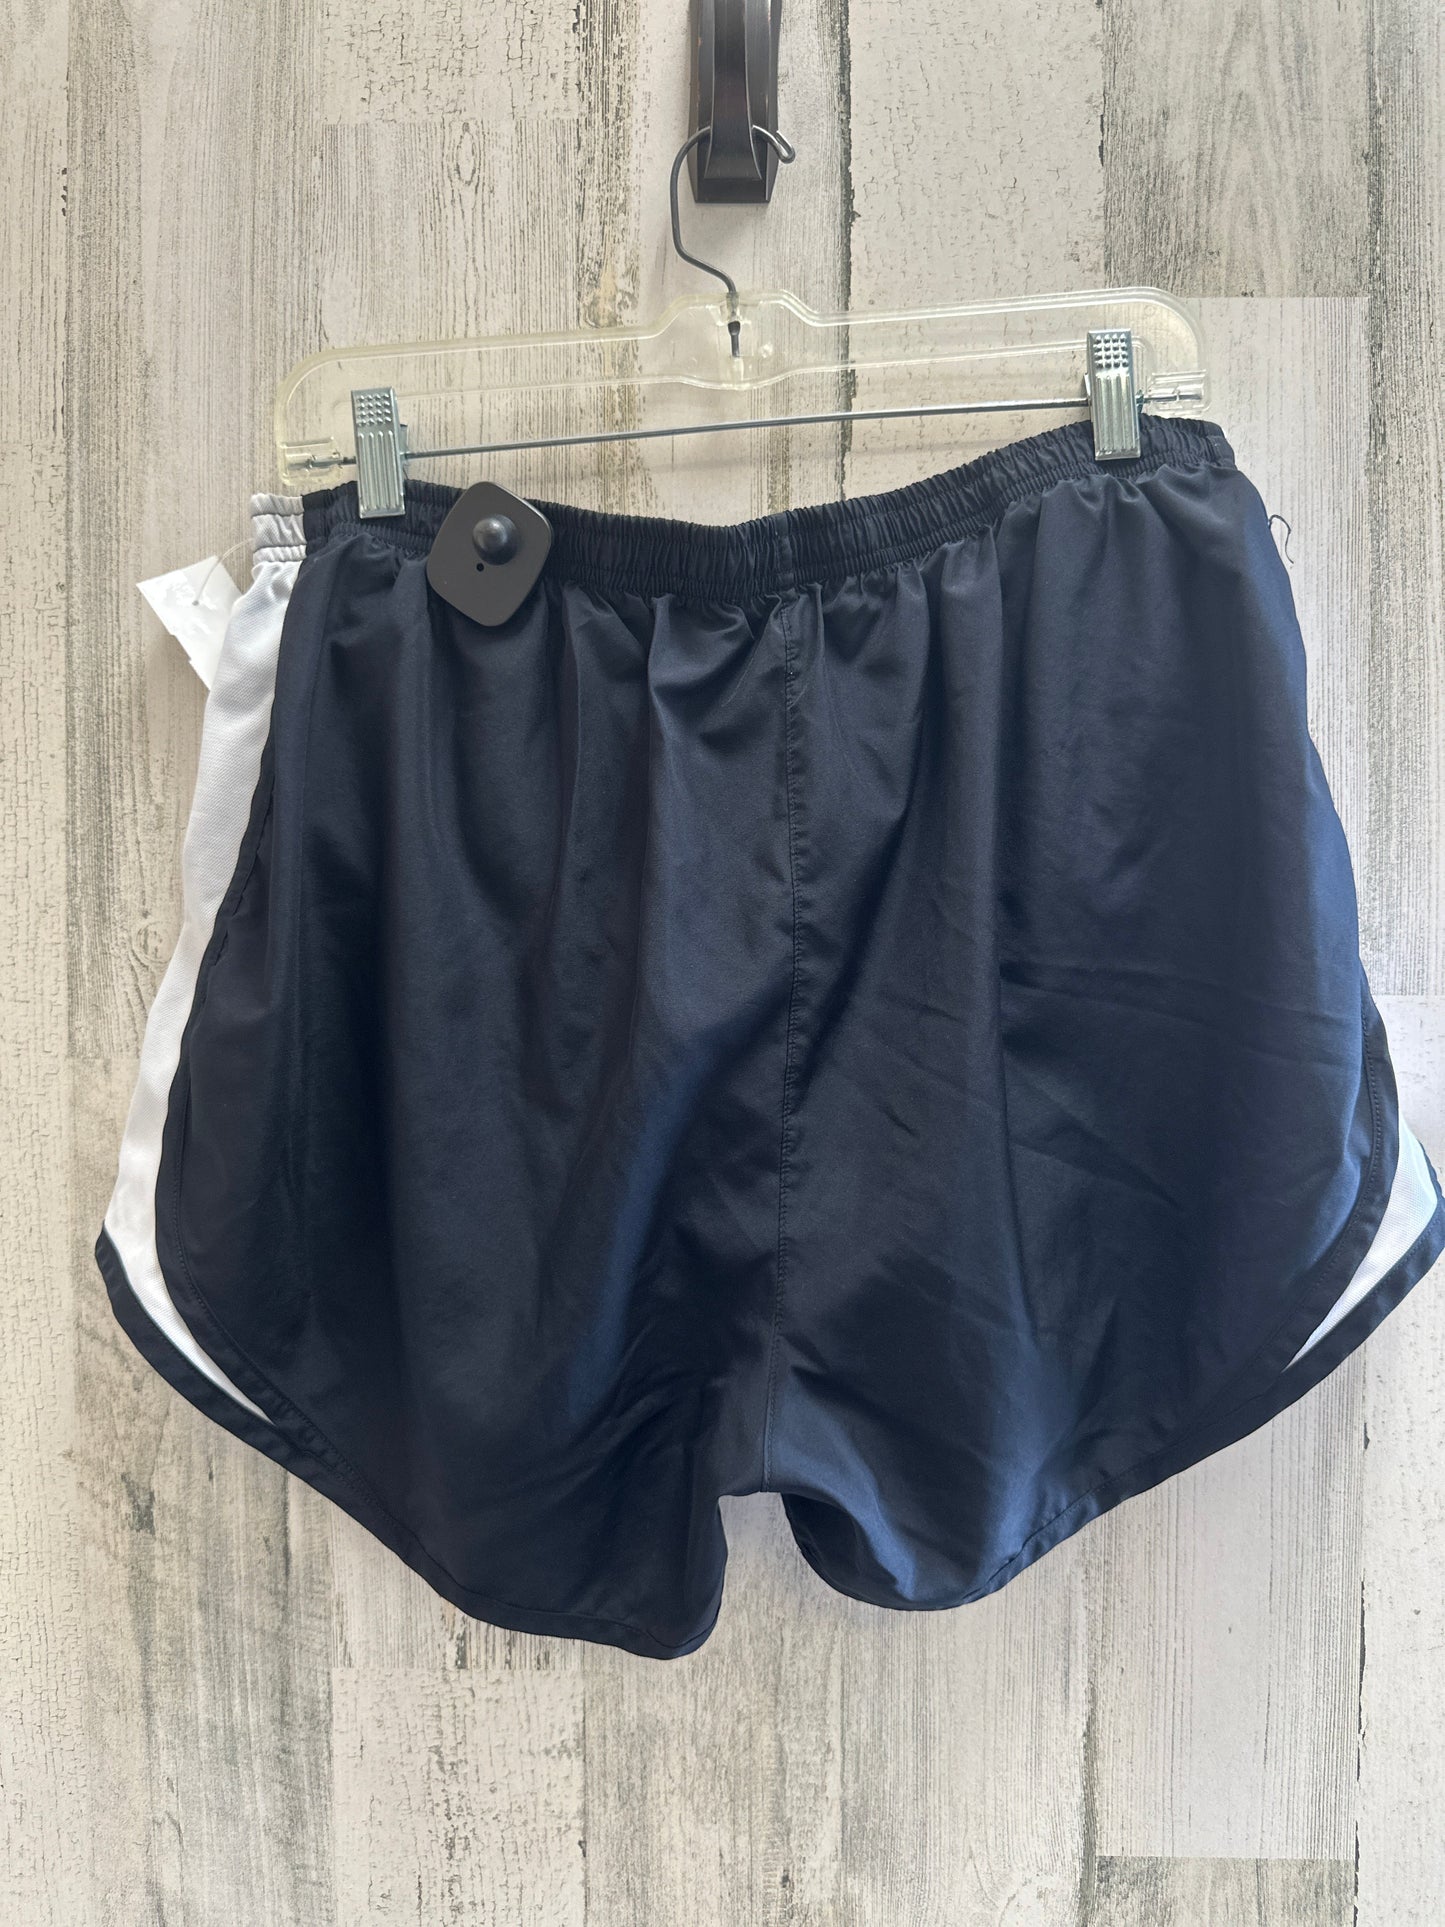 Black Athletic Shorts Clothes Mentor, Size 2x